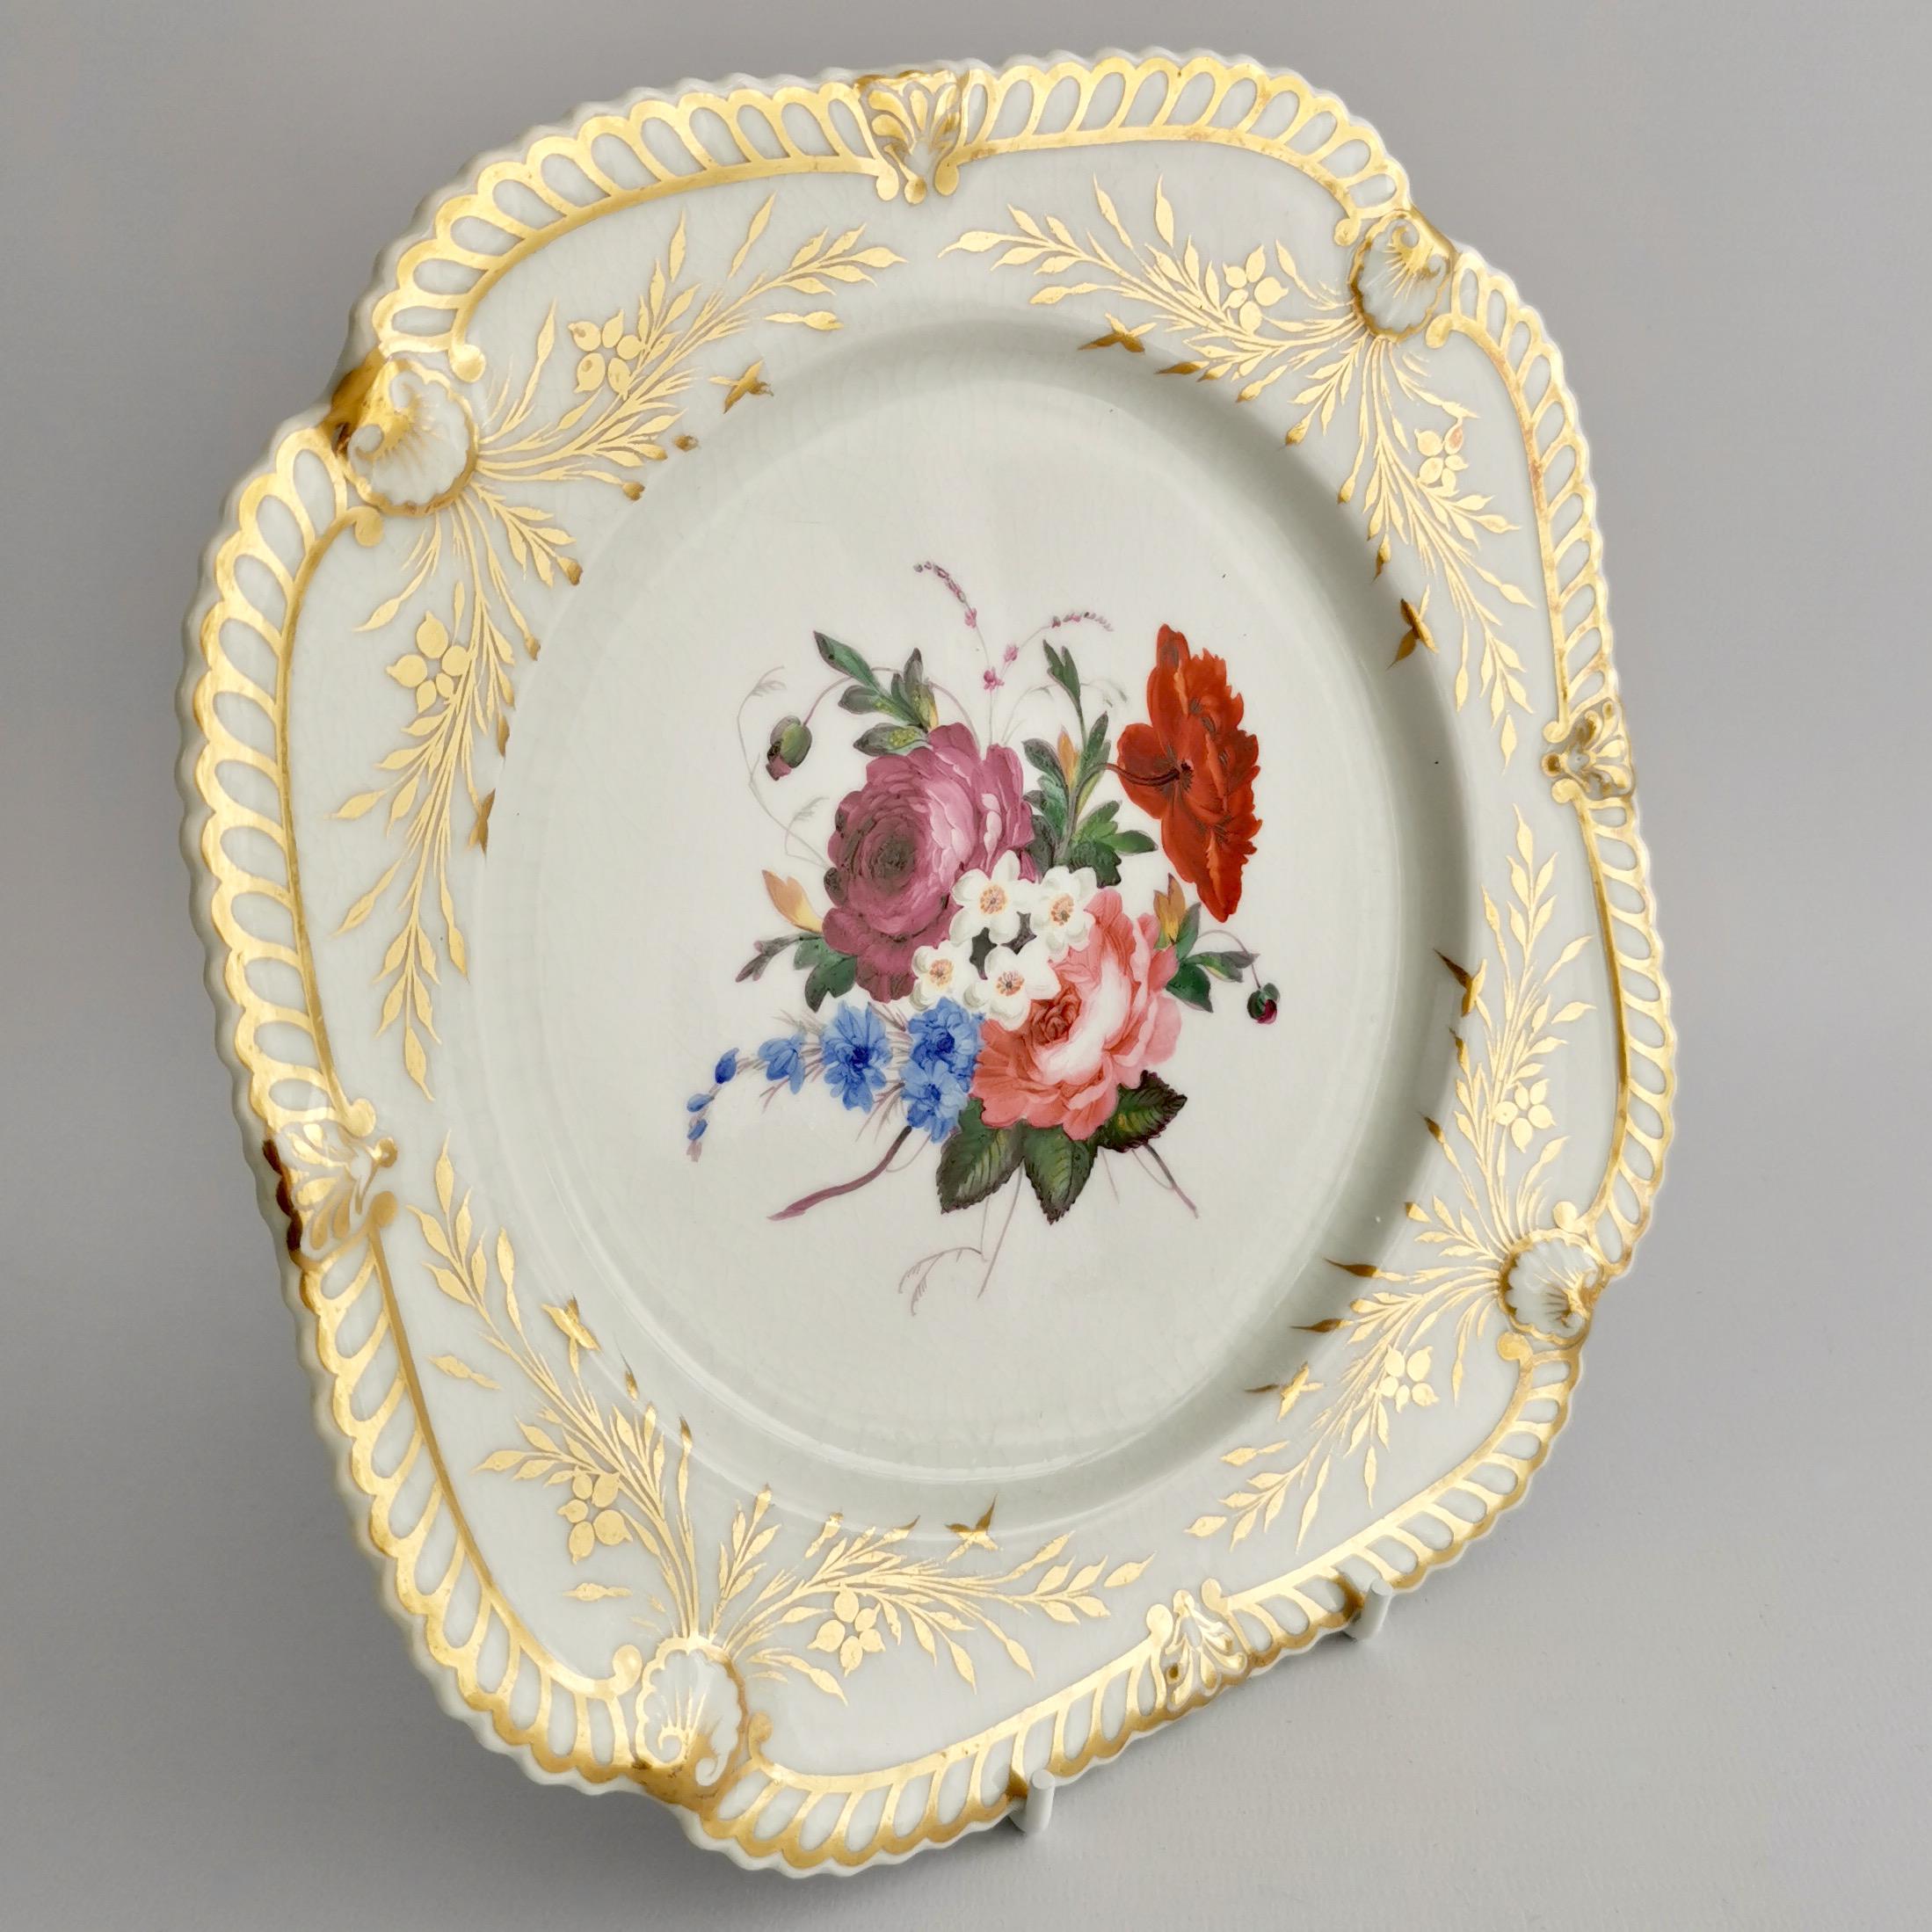 Chamberlains Worcester Porcelain Plate, White with Flowers, Regency ca 1822 '1' 1